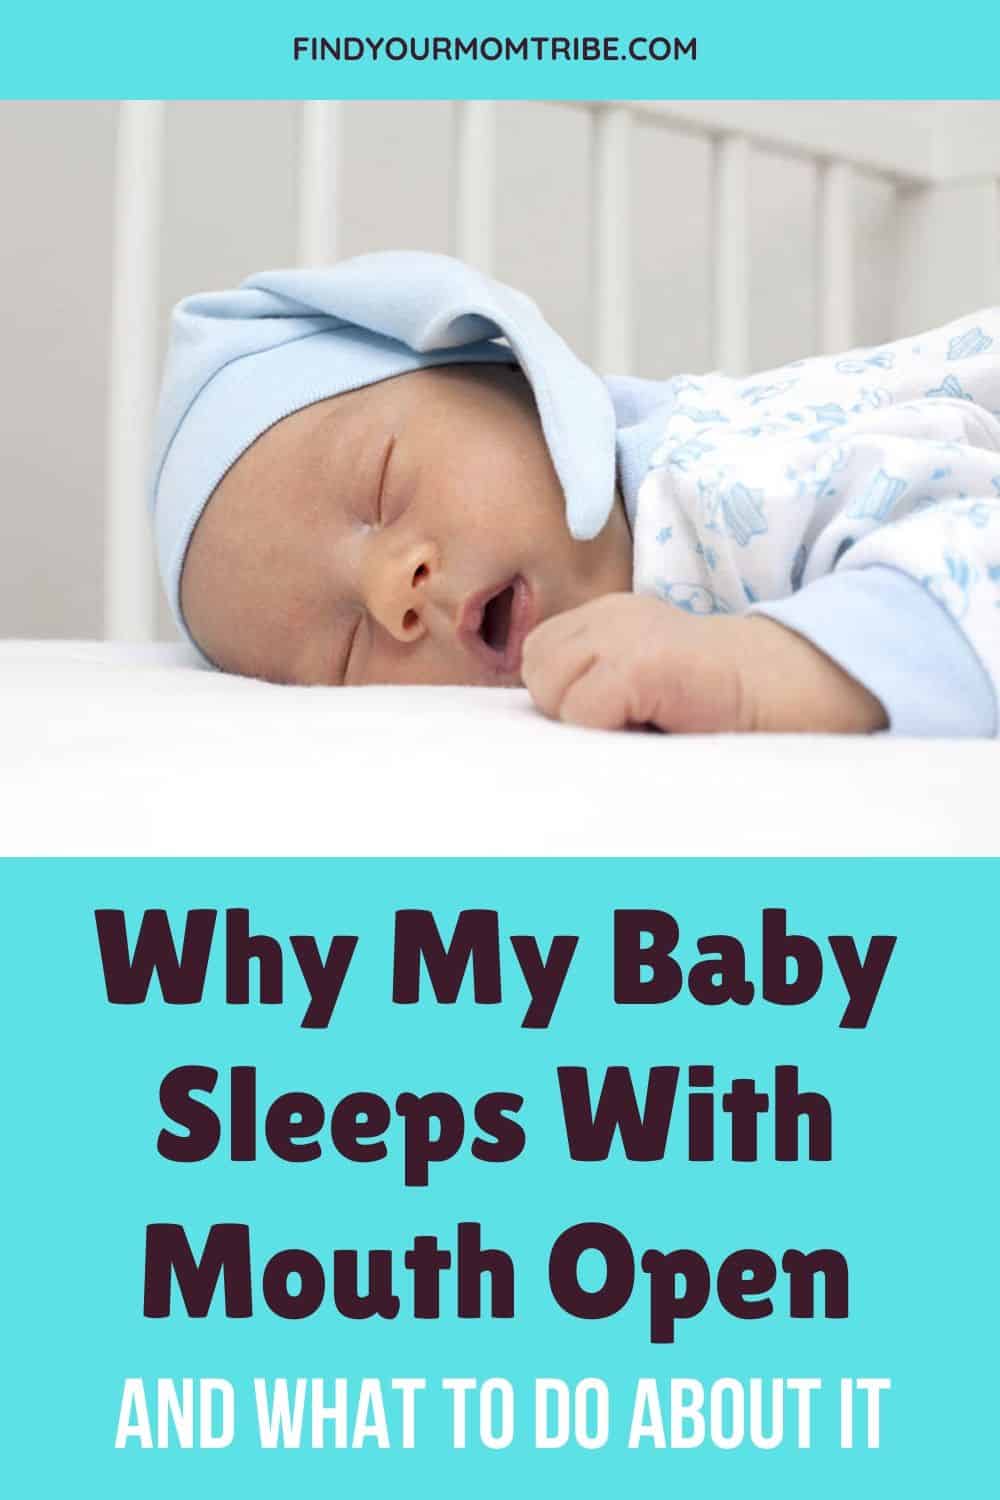 Why My Baby Sleeps With Mouth Open